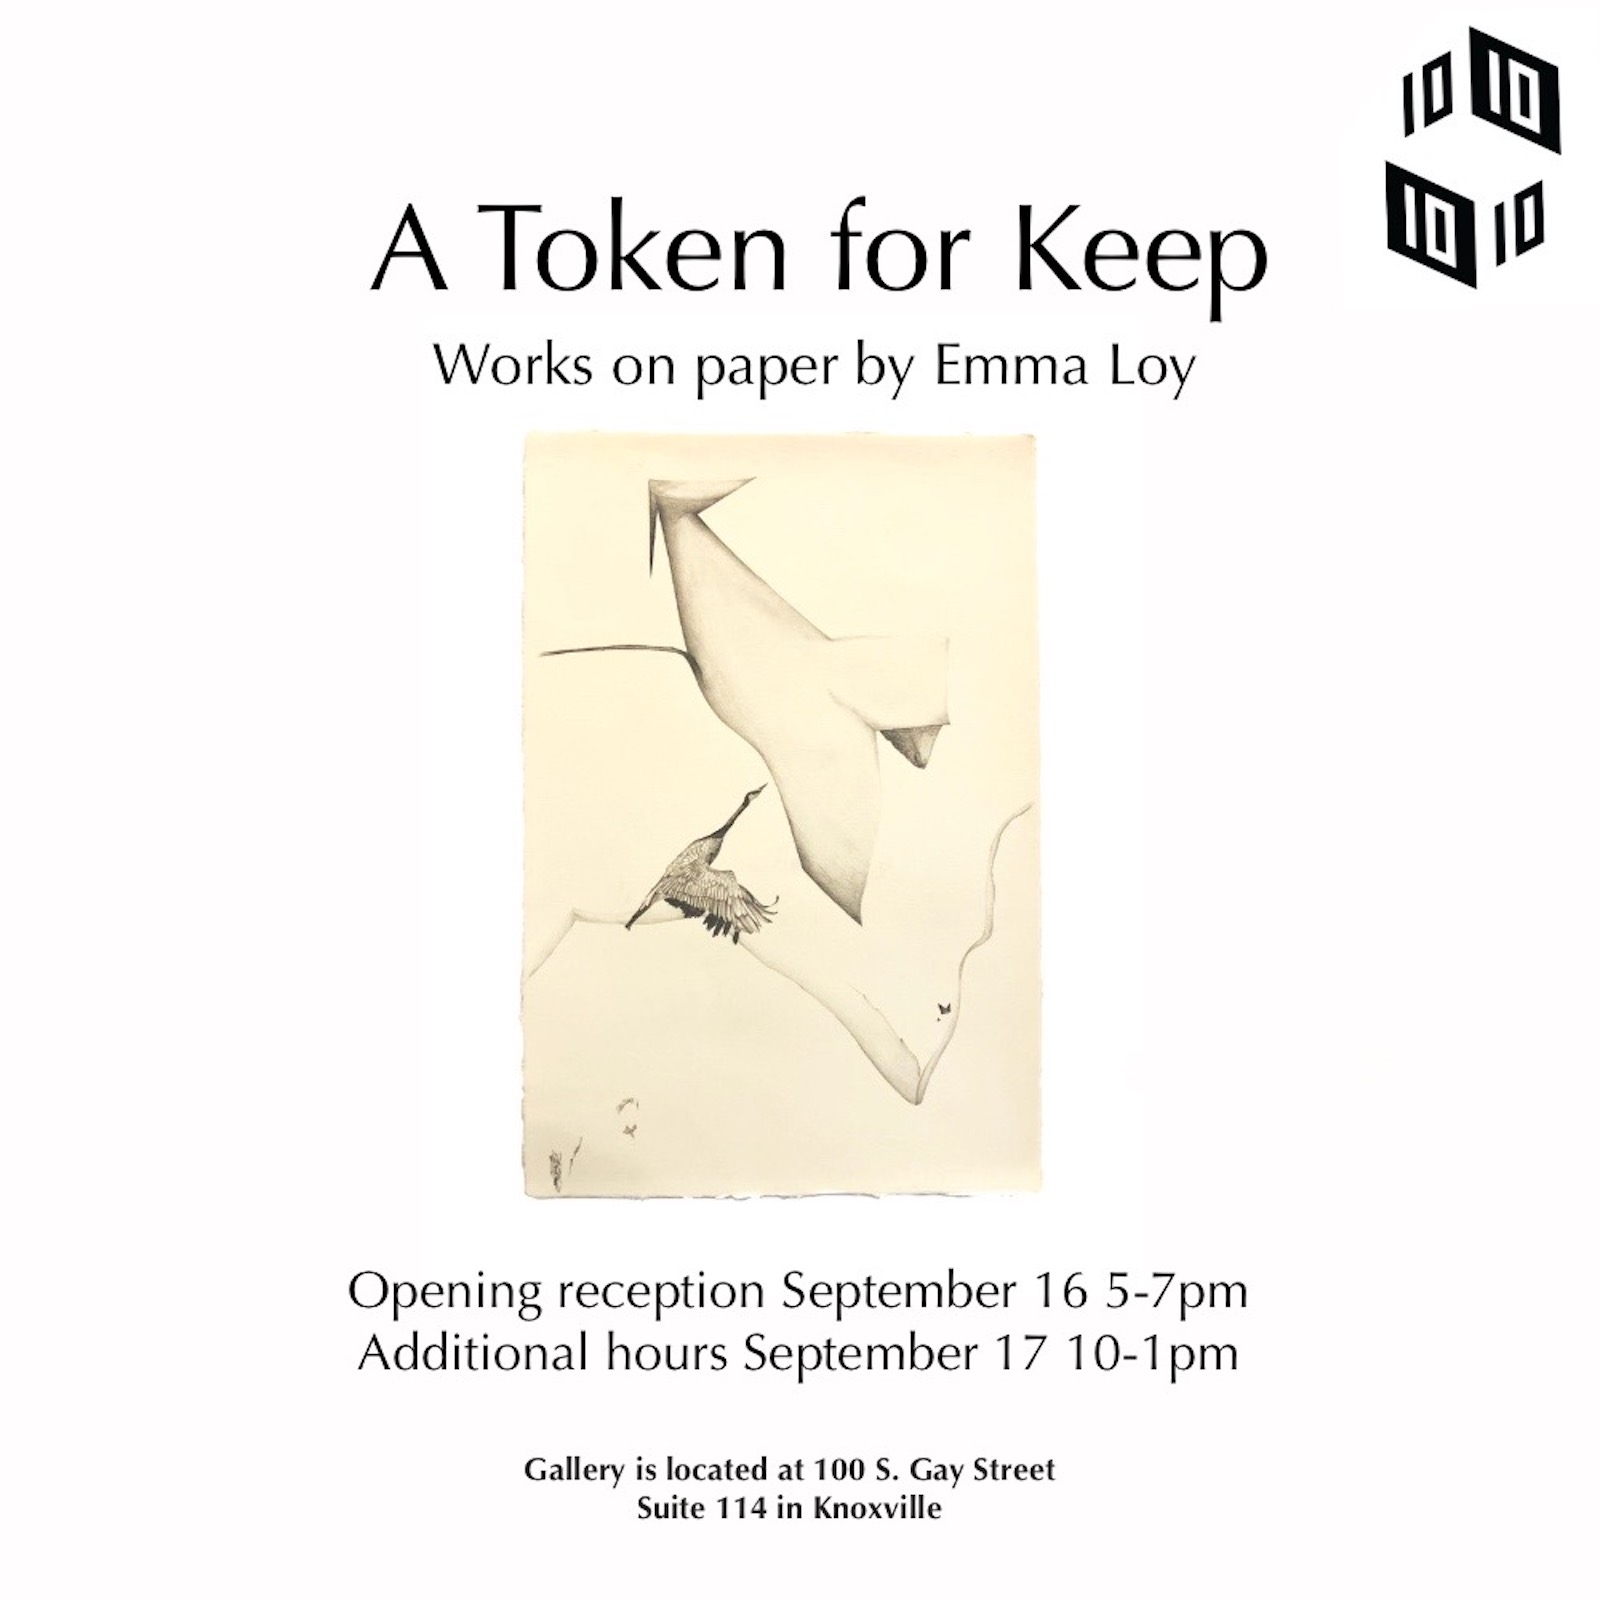 Cover image advertising "A Token for Keep: Works on Paper by Emma Loy" at Gallery 1010